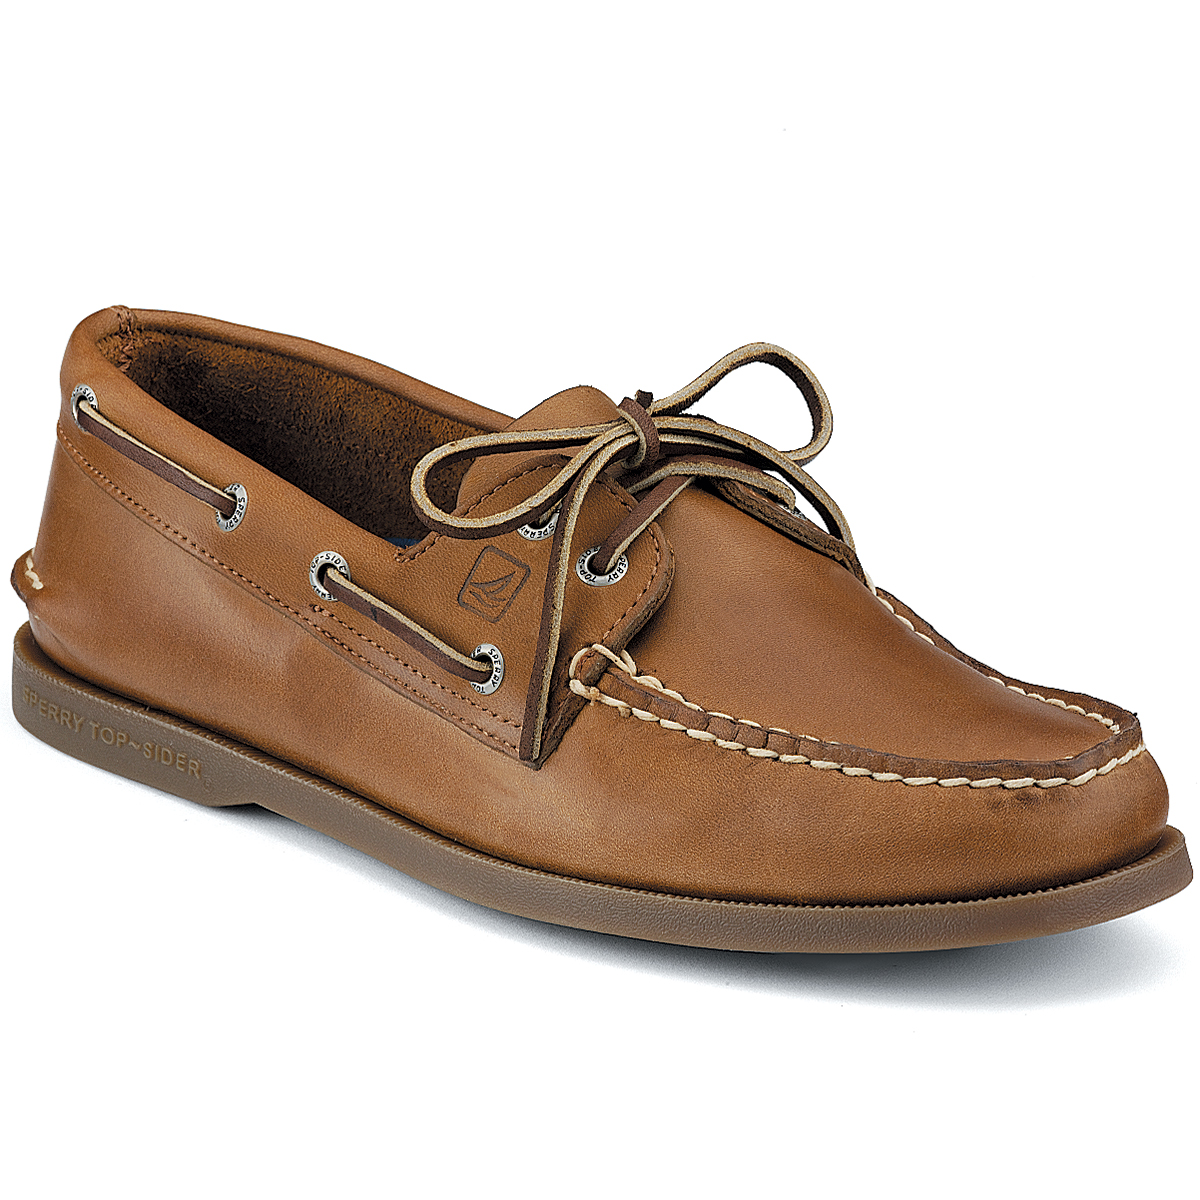 Sperry Men's Authentic Original 2-Eye Boat Shoes, Wide - Size 13